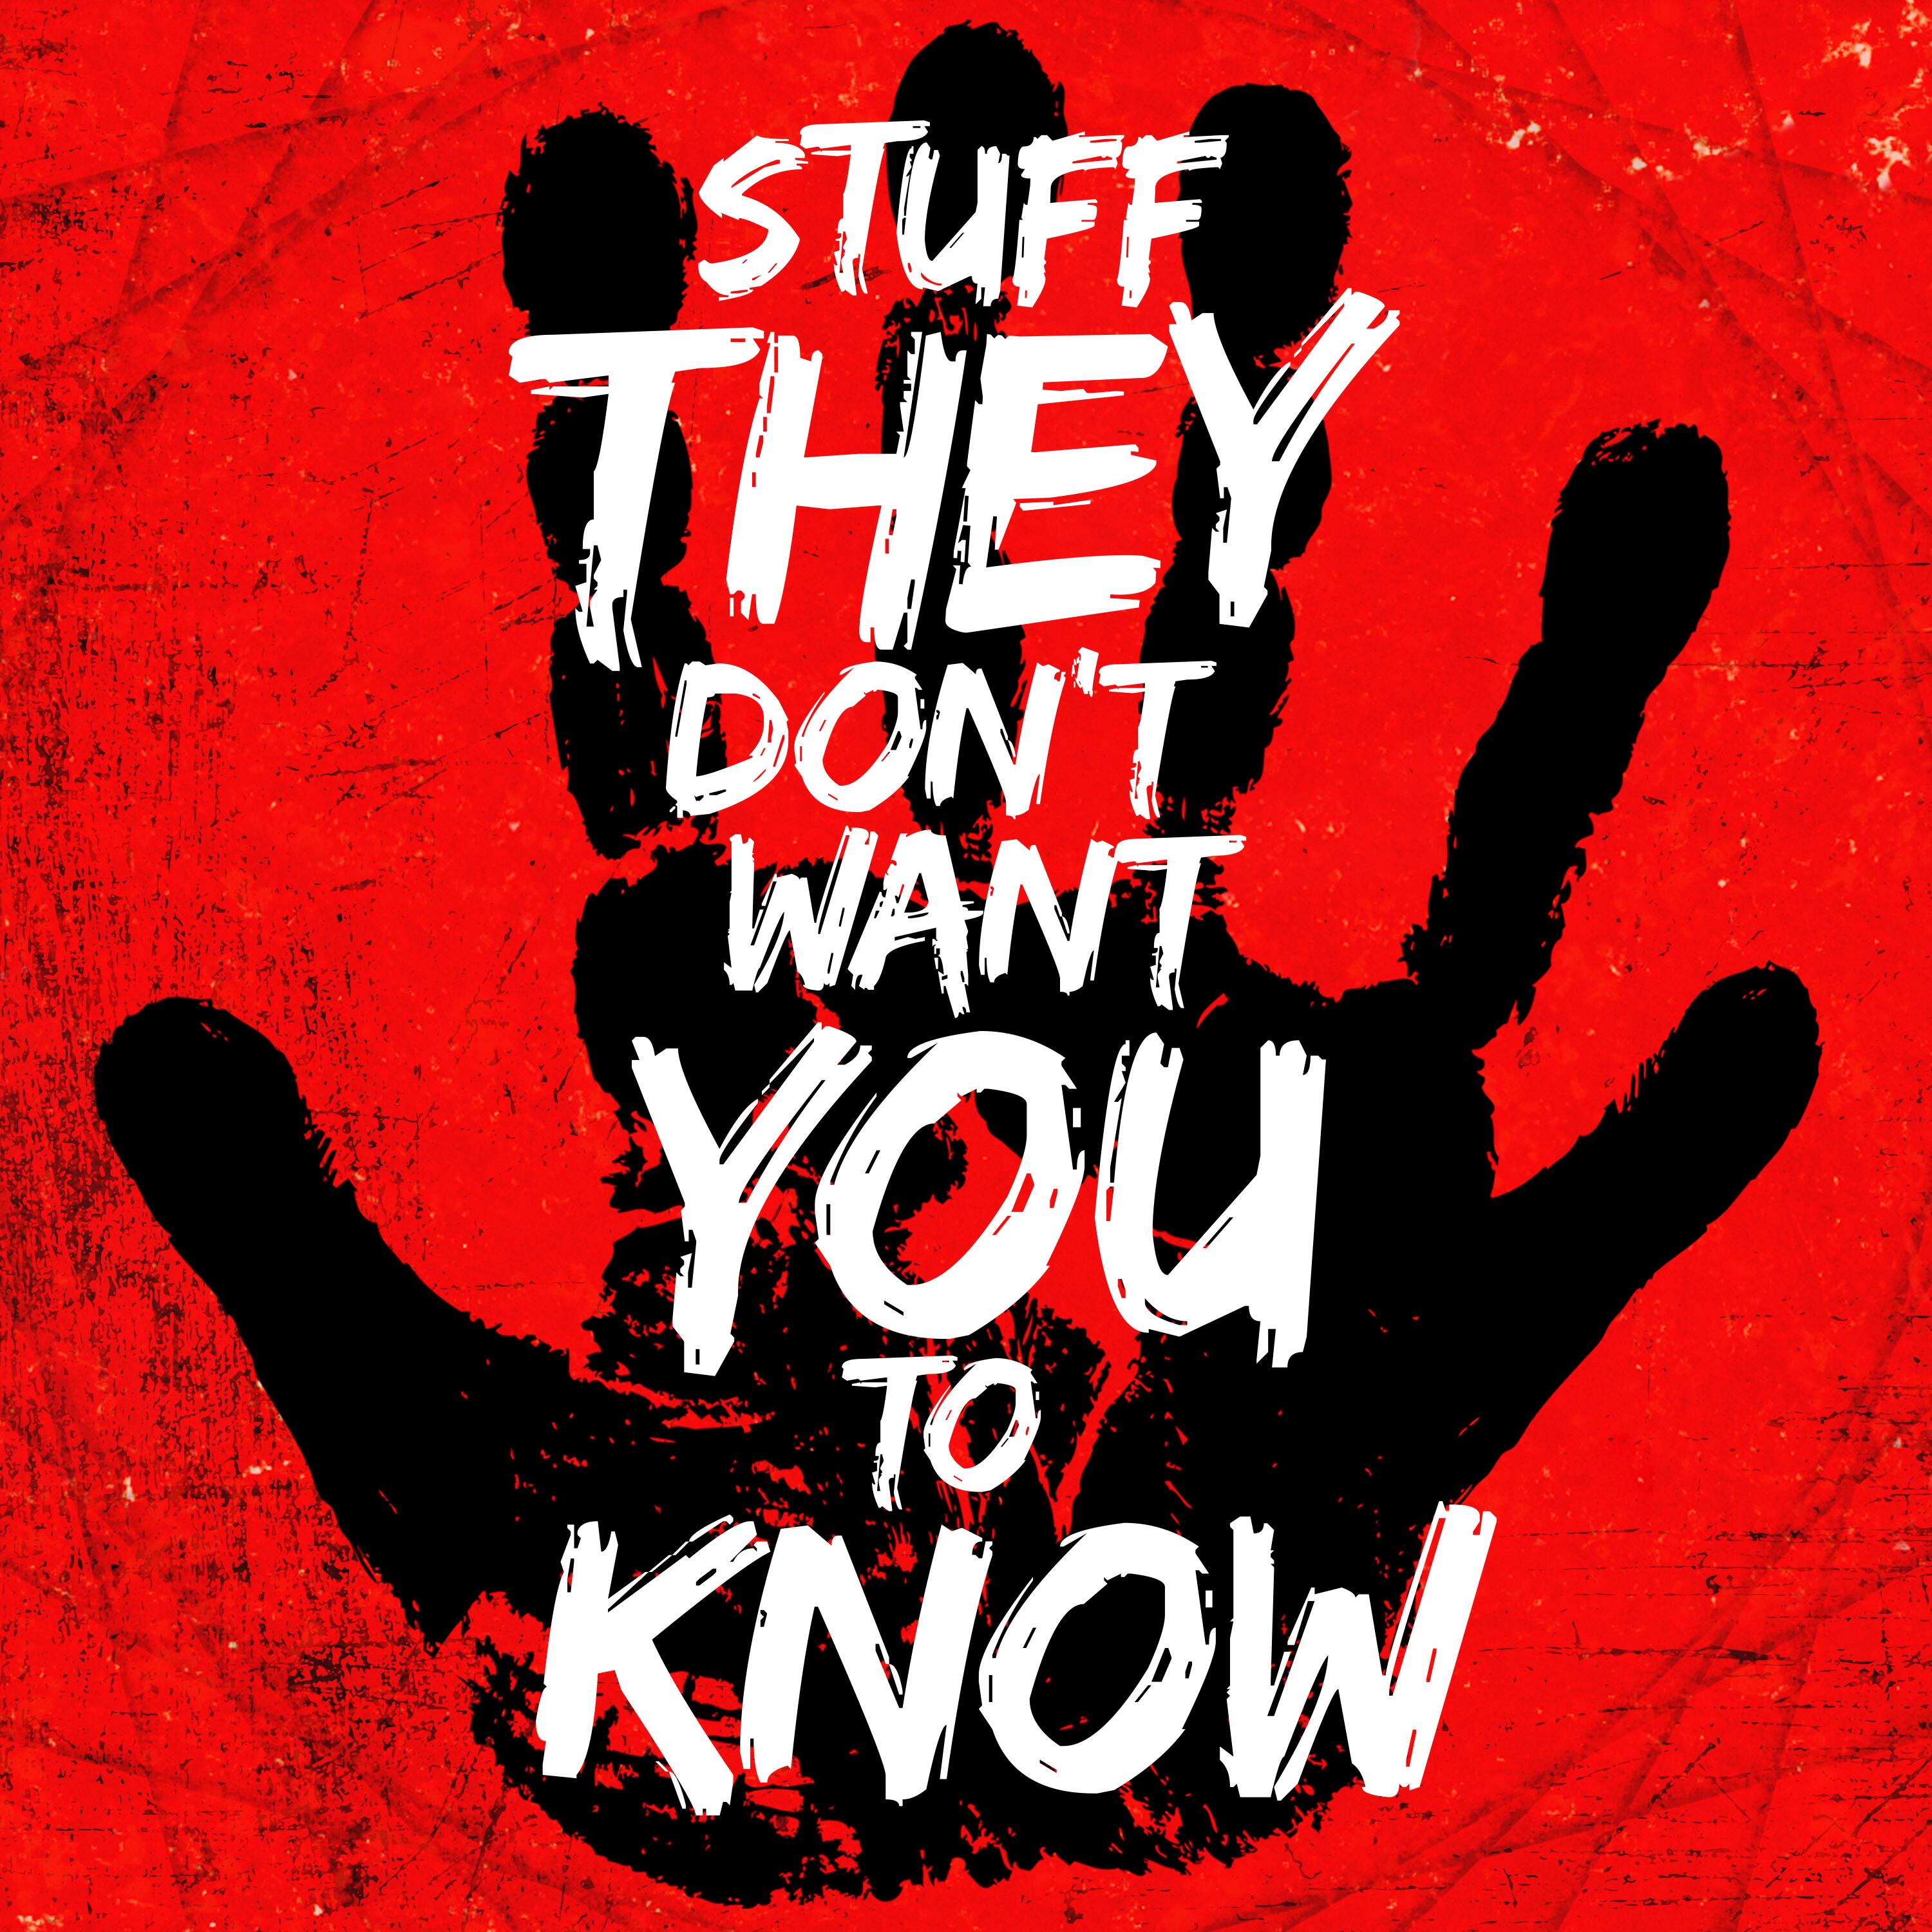 Stuff They Don T Want You To Know - HD Wallpaper 